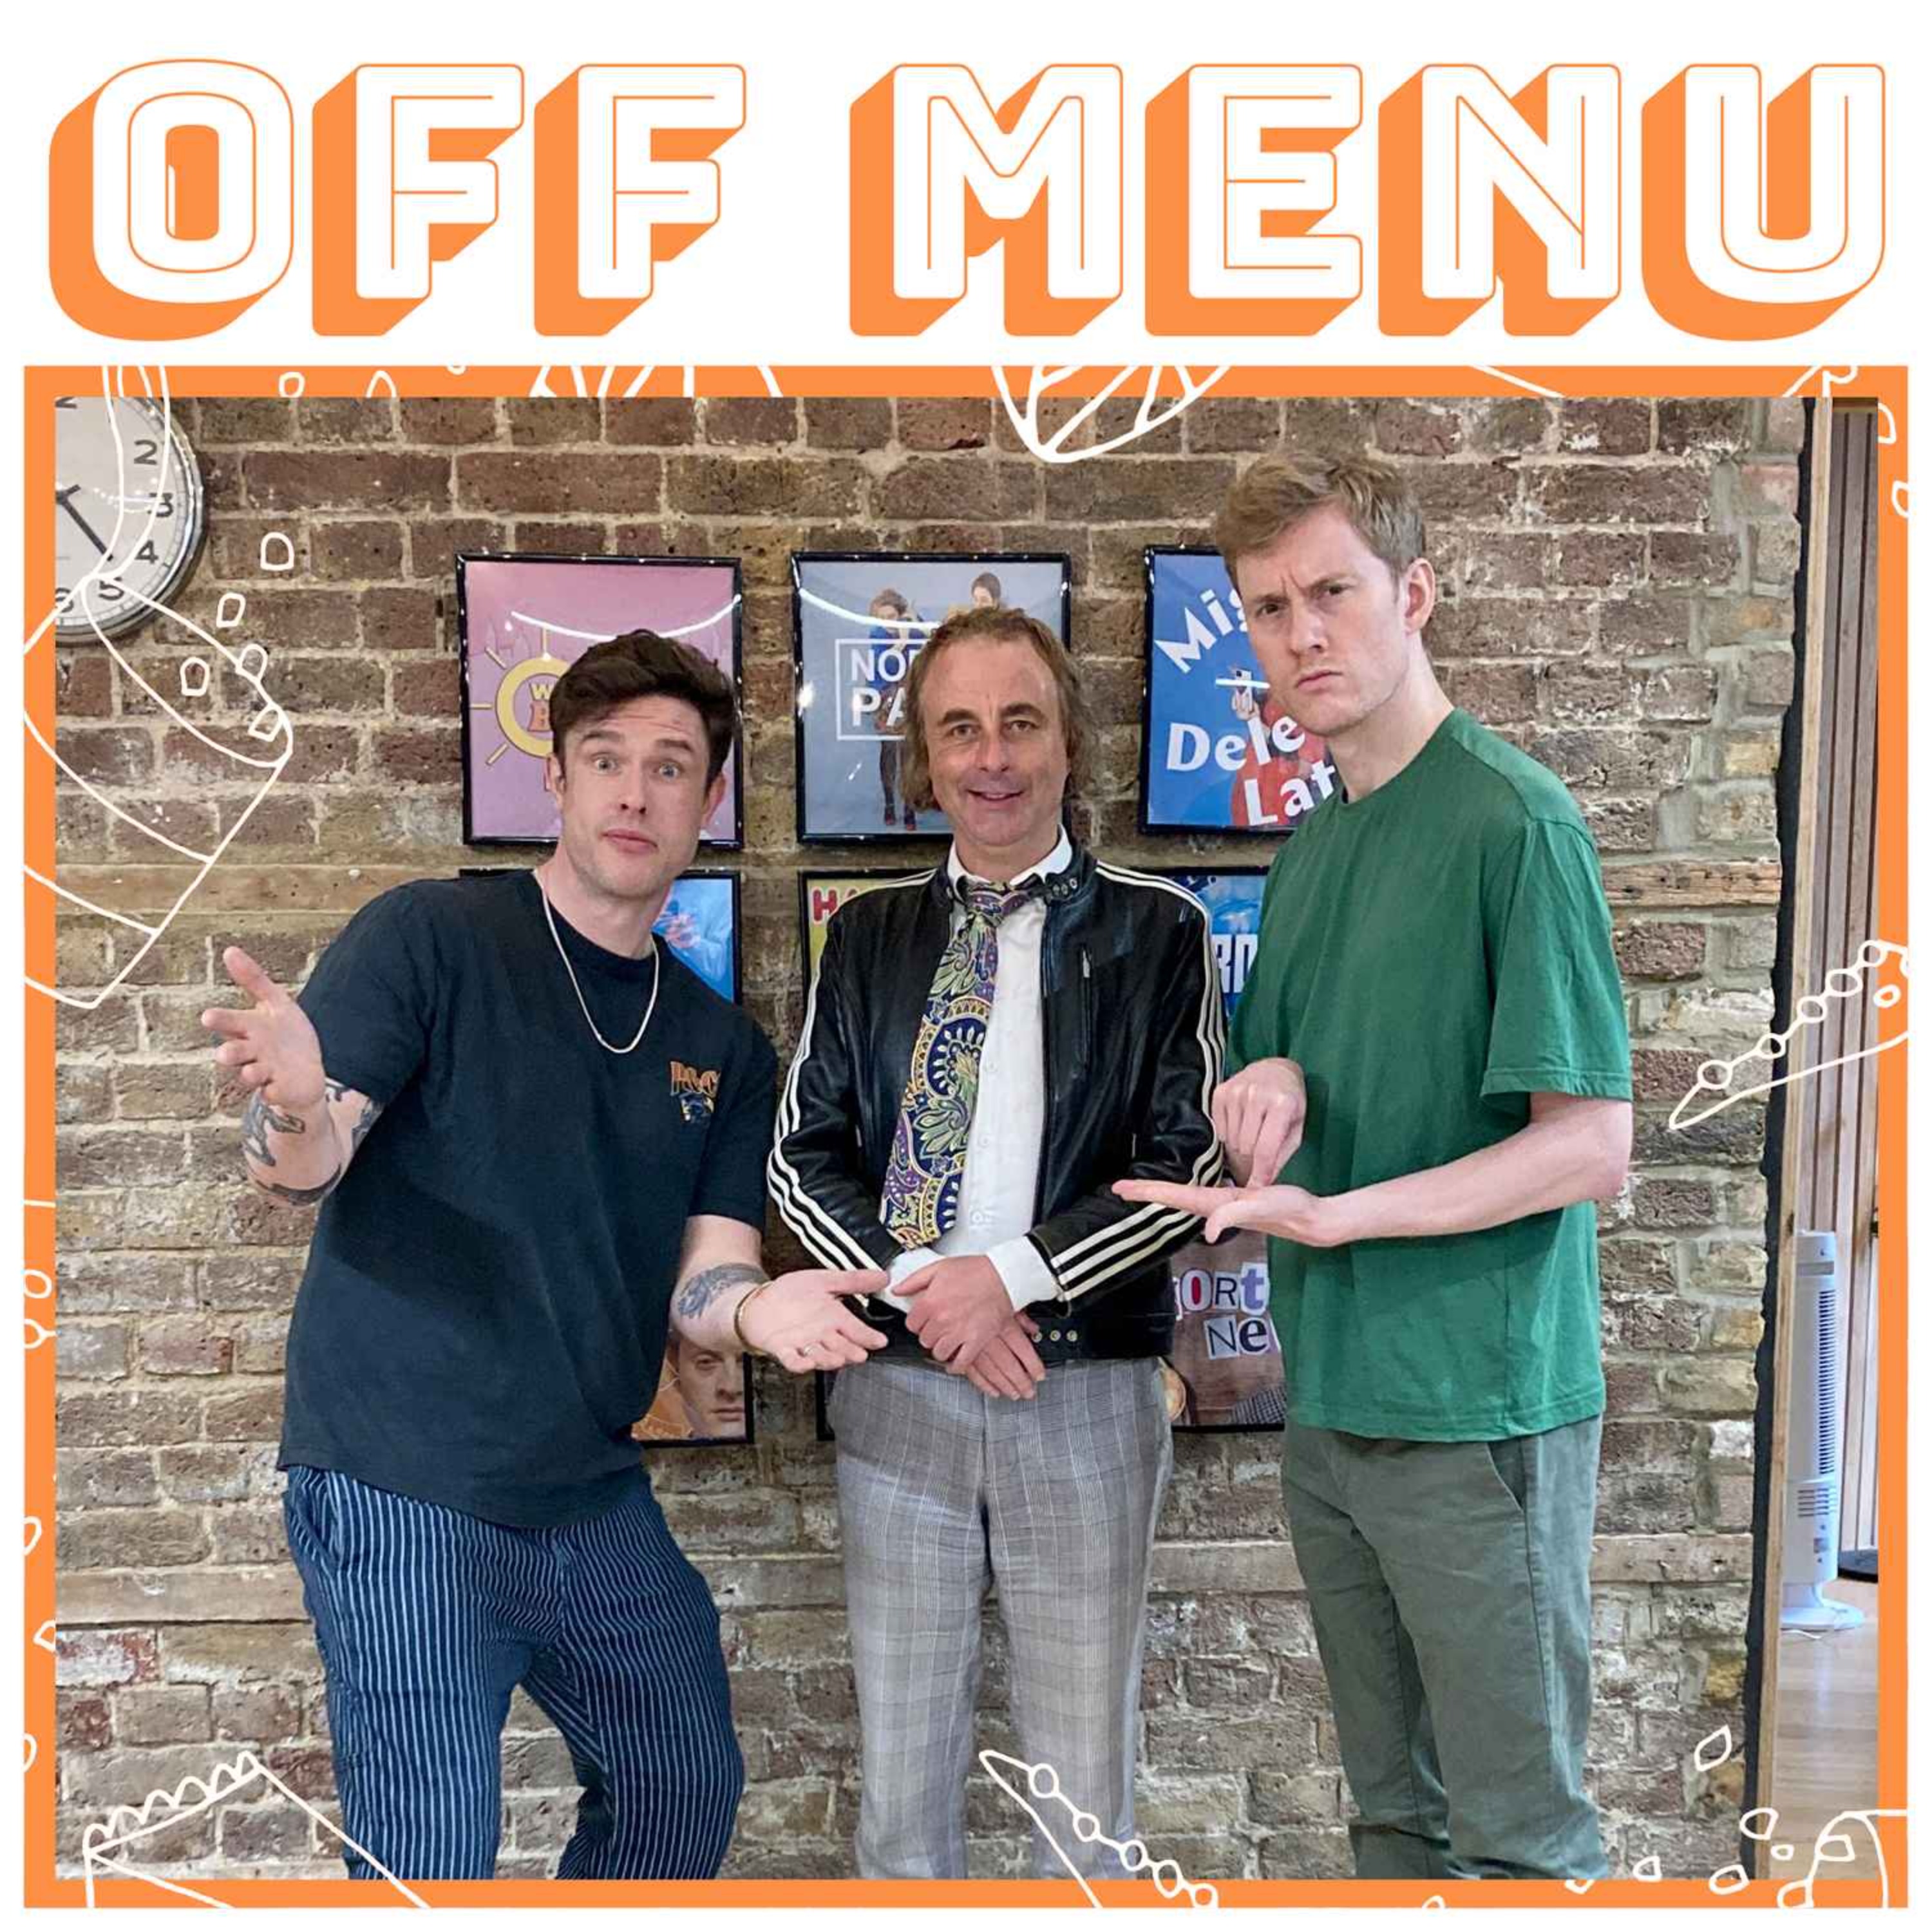 Ep 203: Paul Foot - Off Menu with Ed Gamble and James Acaster | Lyssna ...